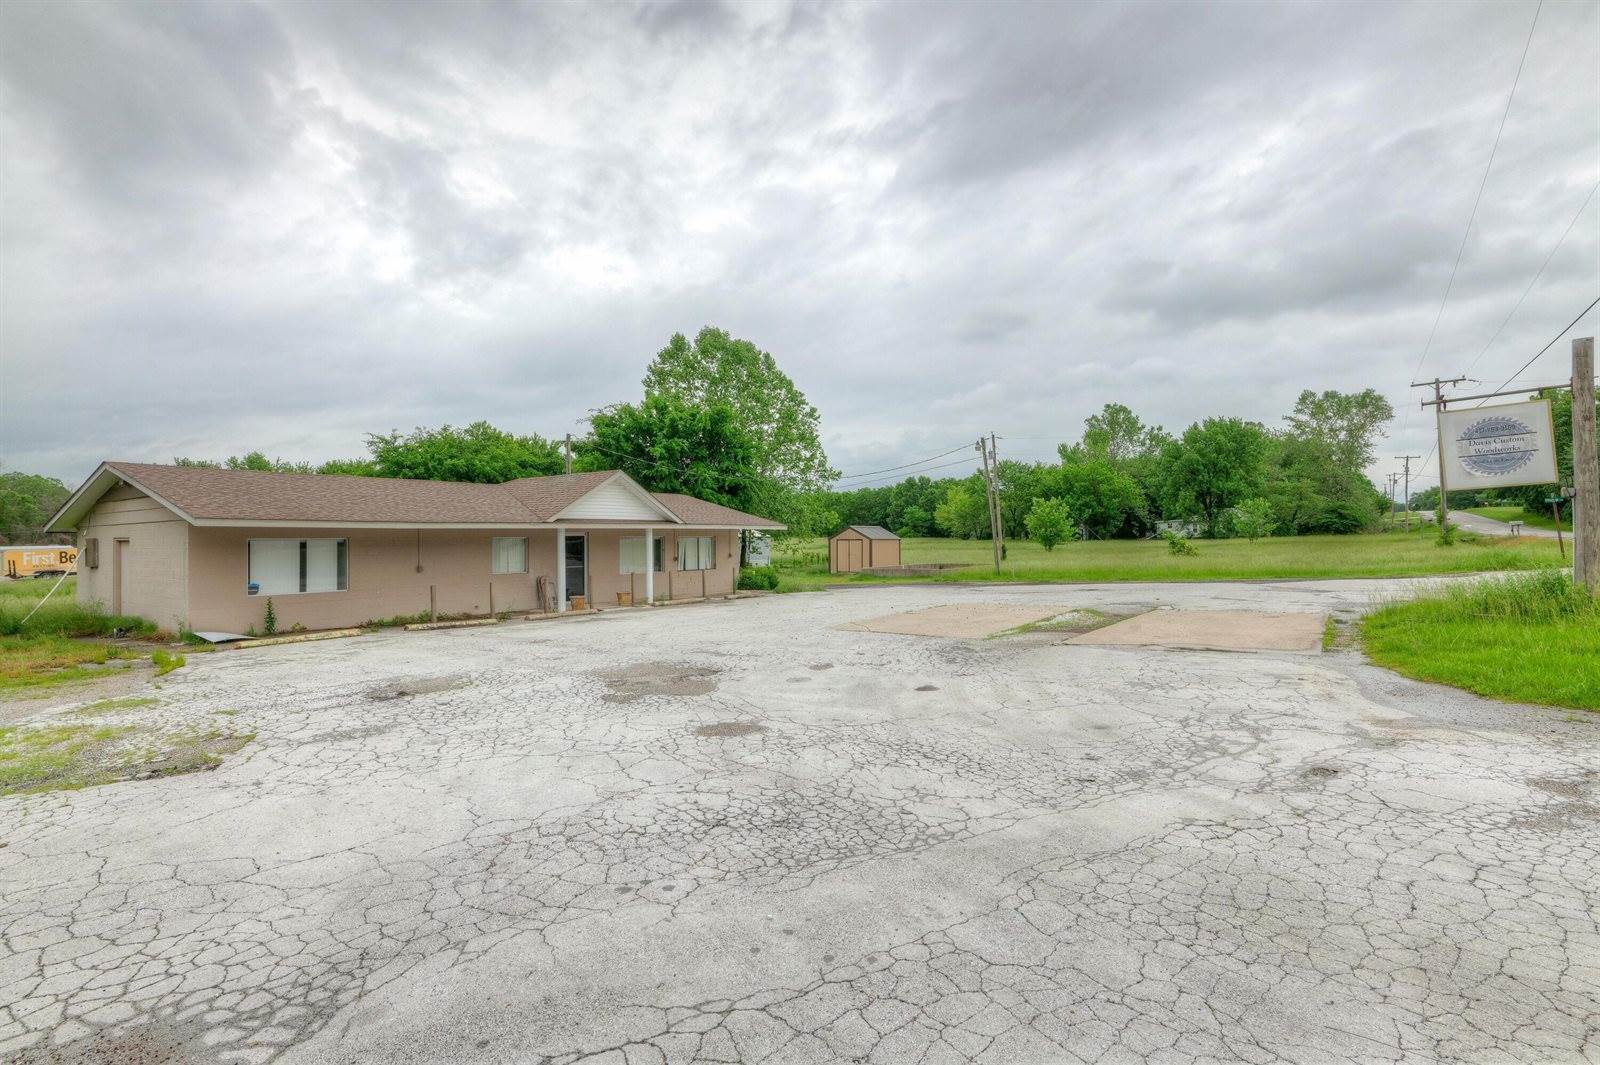 7607 County Road 290, Carl Junction, MO 64834